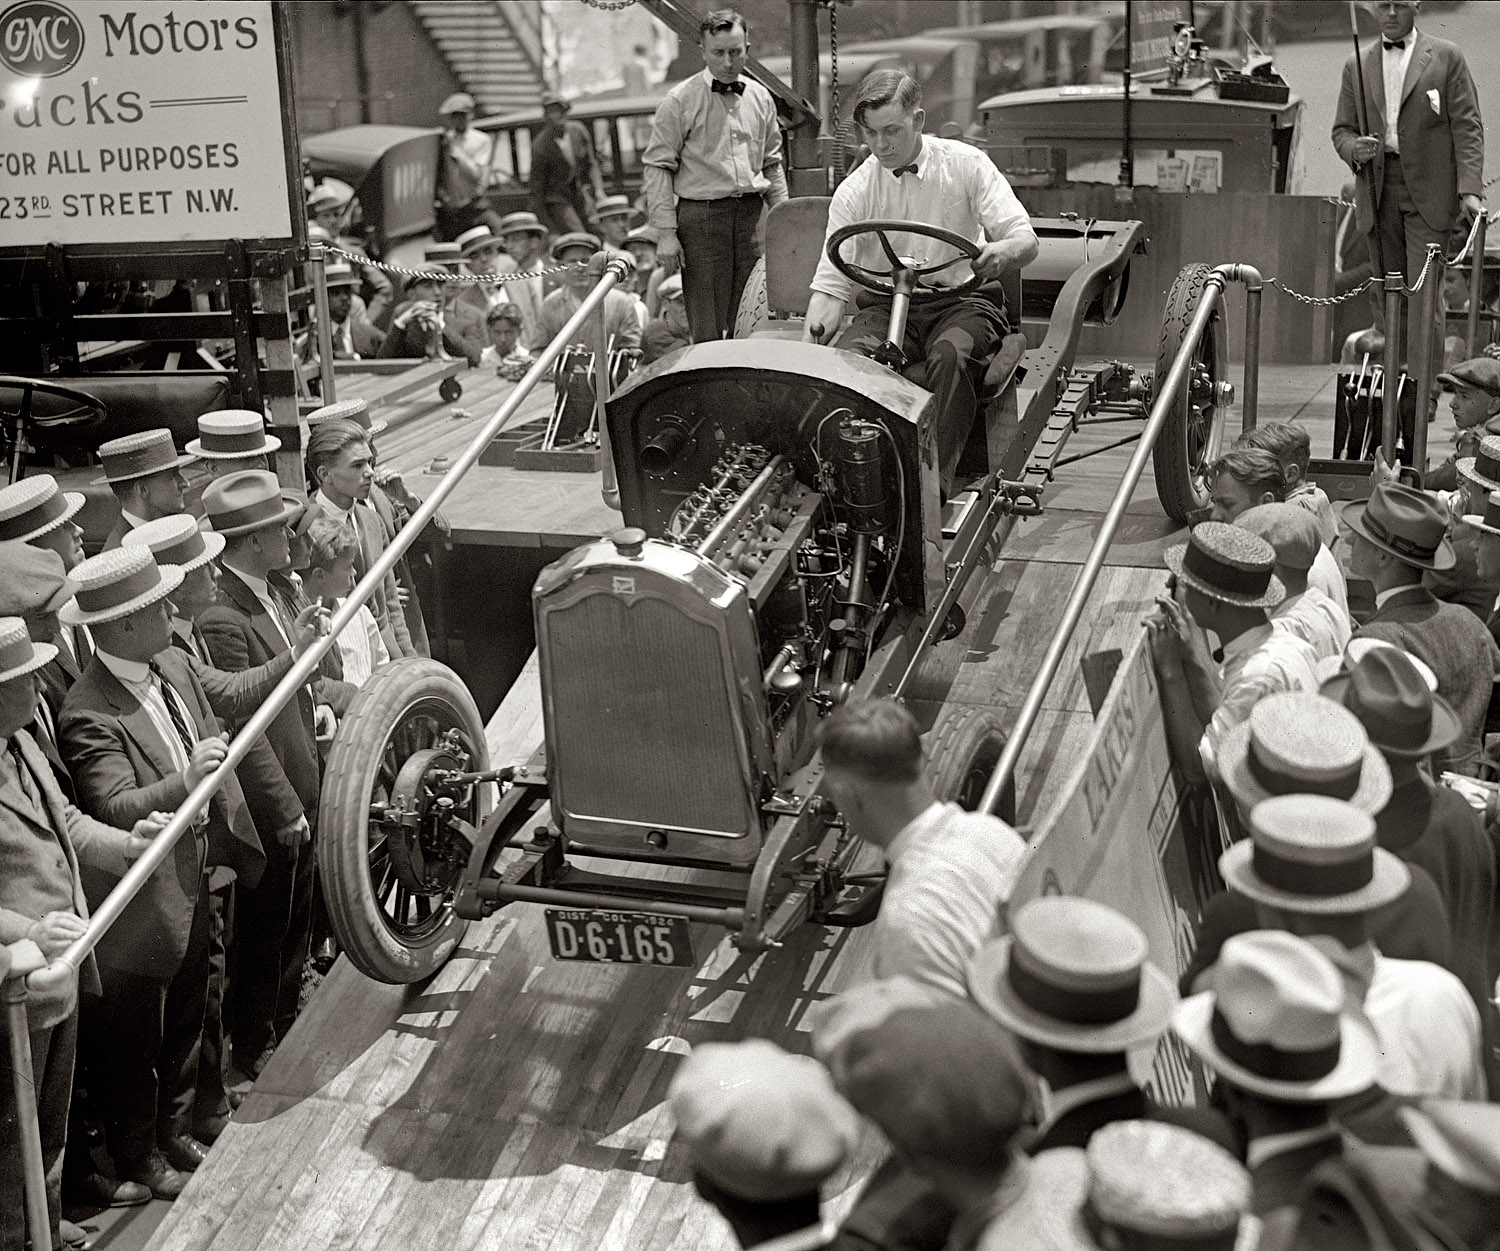 Washington, 1924. "Buick Motor Co." A demonstration of "Buick standard- ization." (More here.) National Photo Company glass negative. View full size.